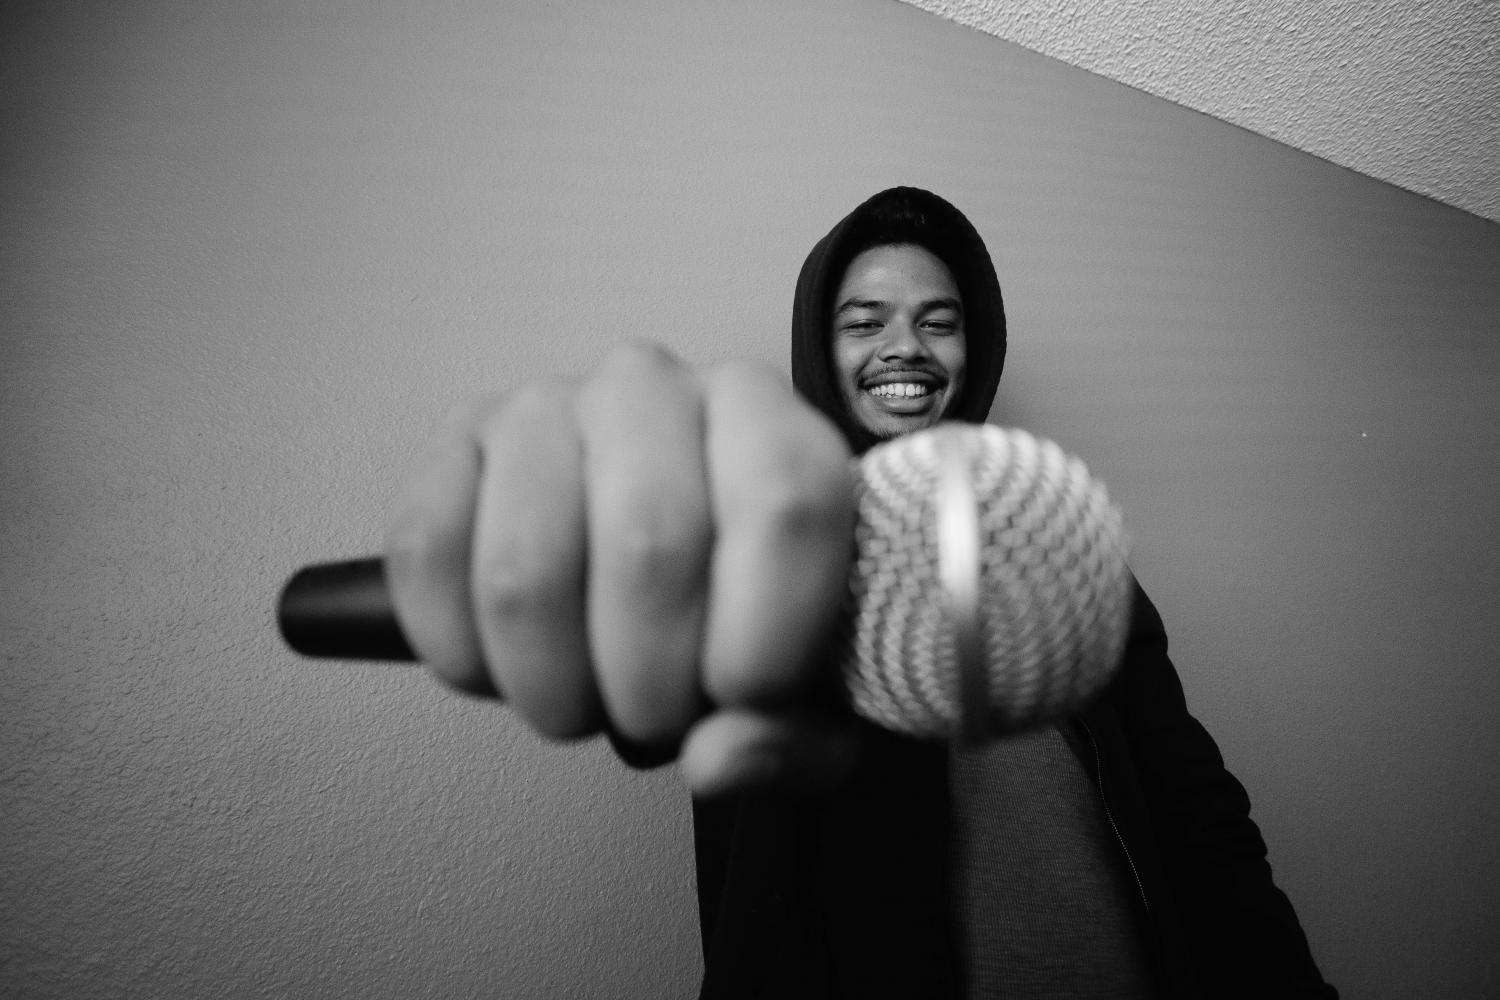 Rapper hopes to make a difference through his music on SoundCloud